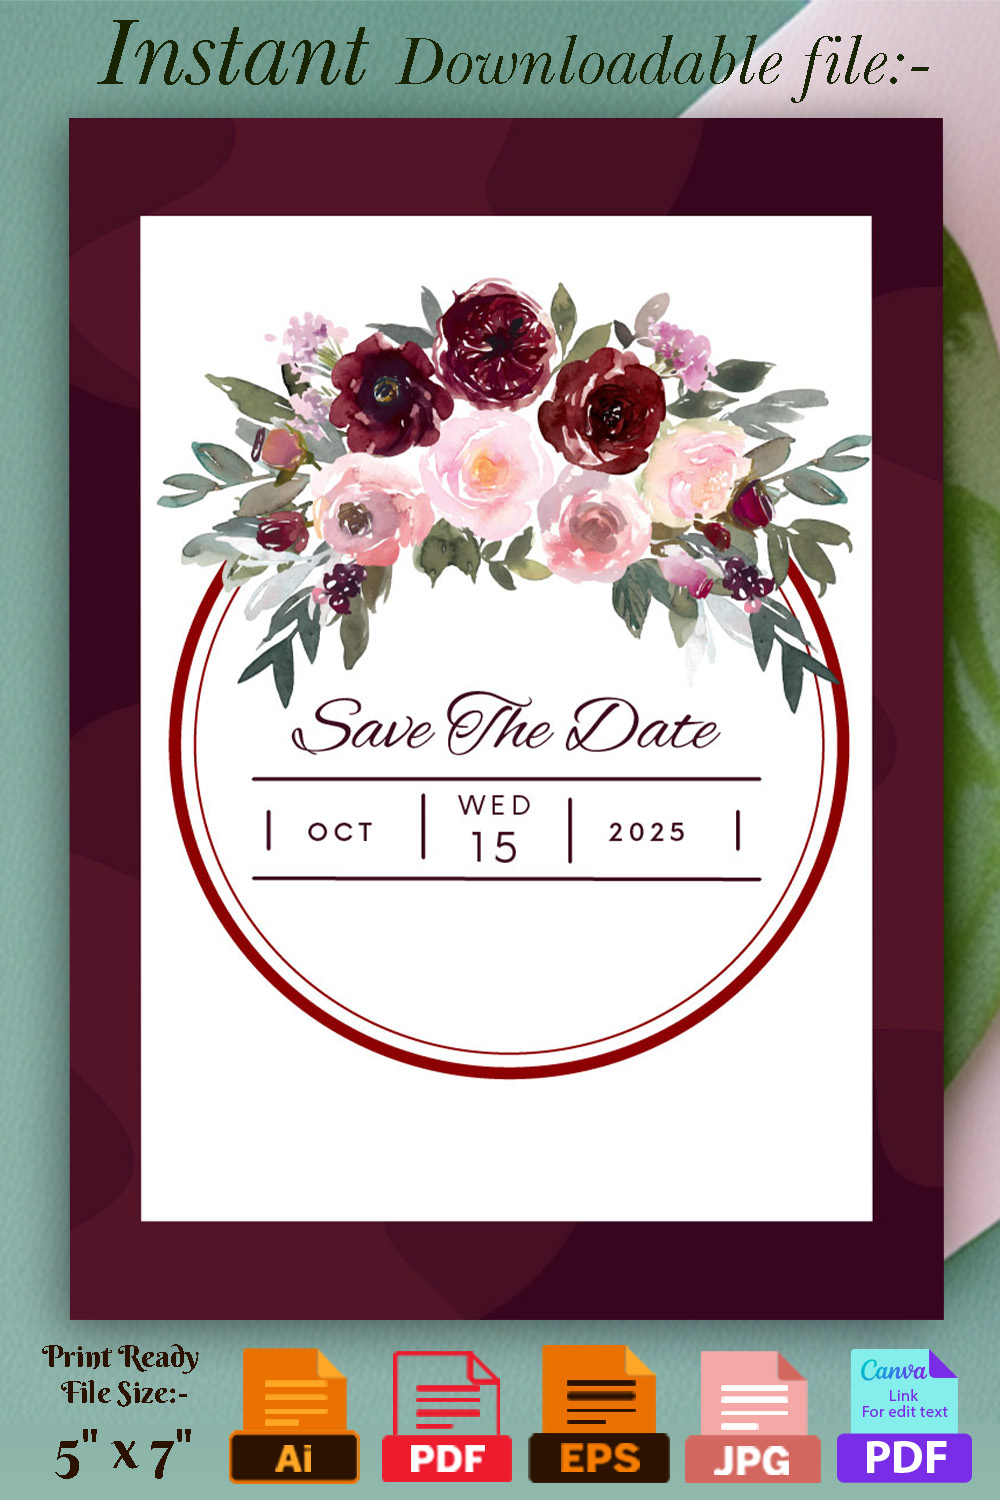 Image with irresistible wedding invitation in burgundy colors.